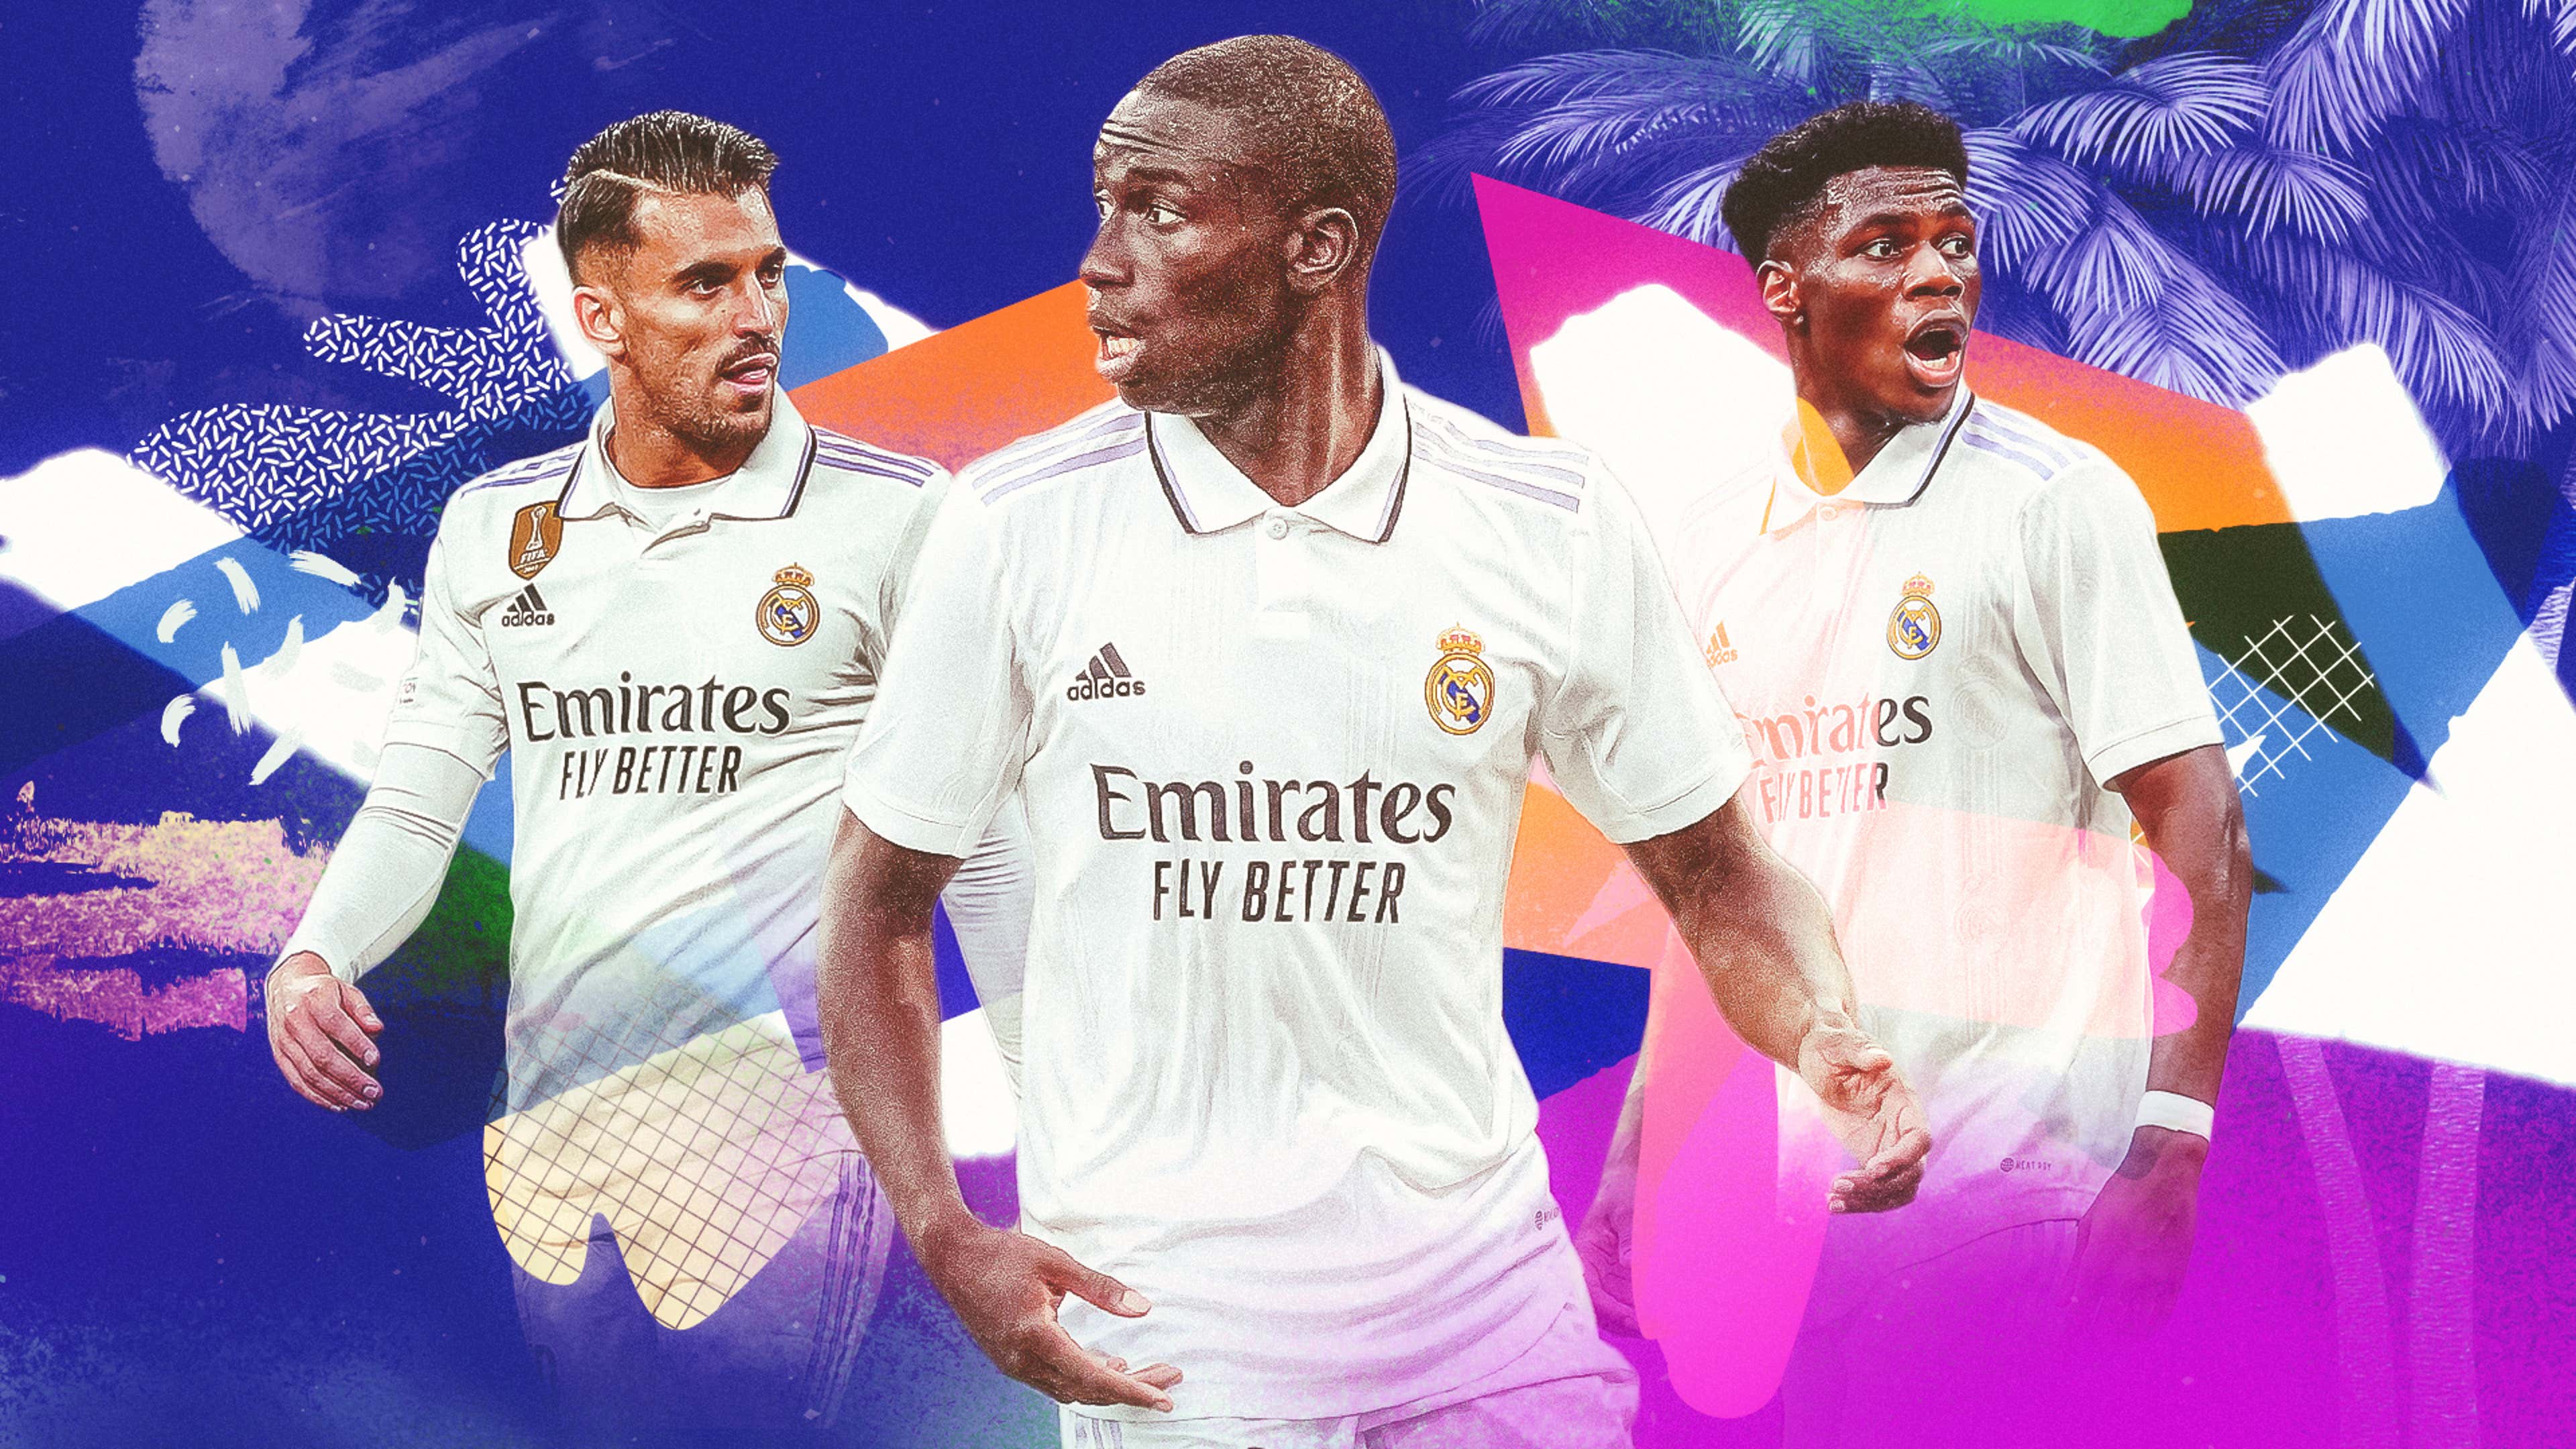 The €500m Real Madrid have spunked on 17 players since winning